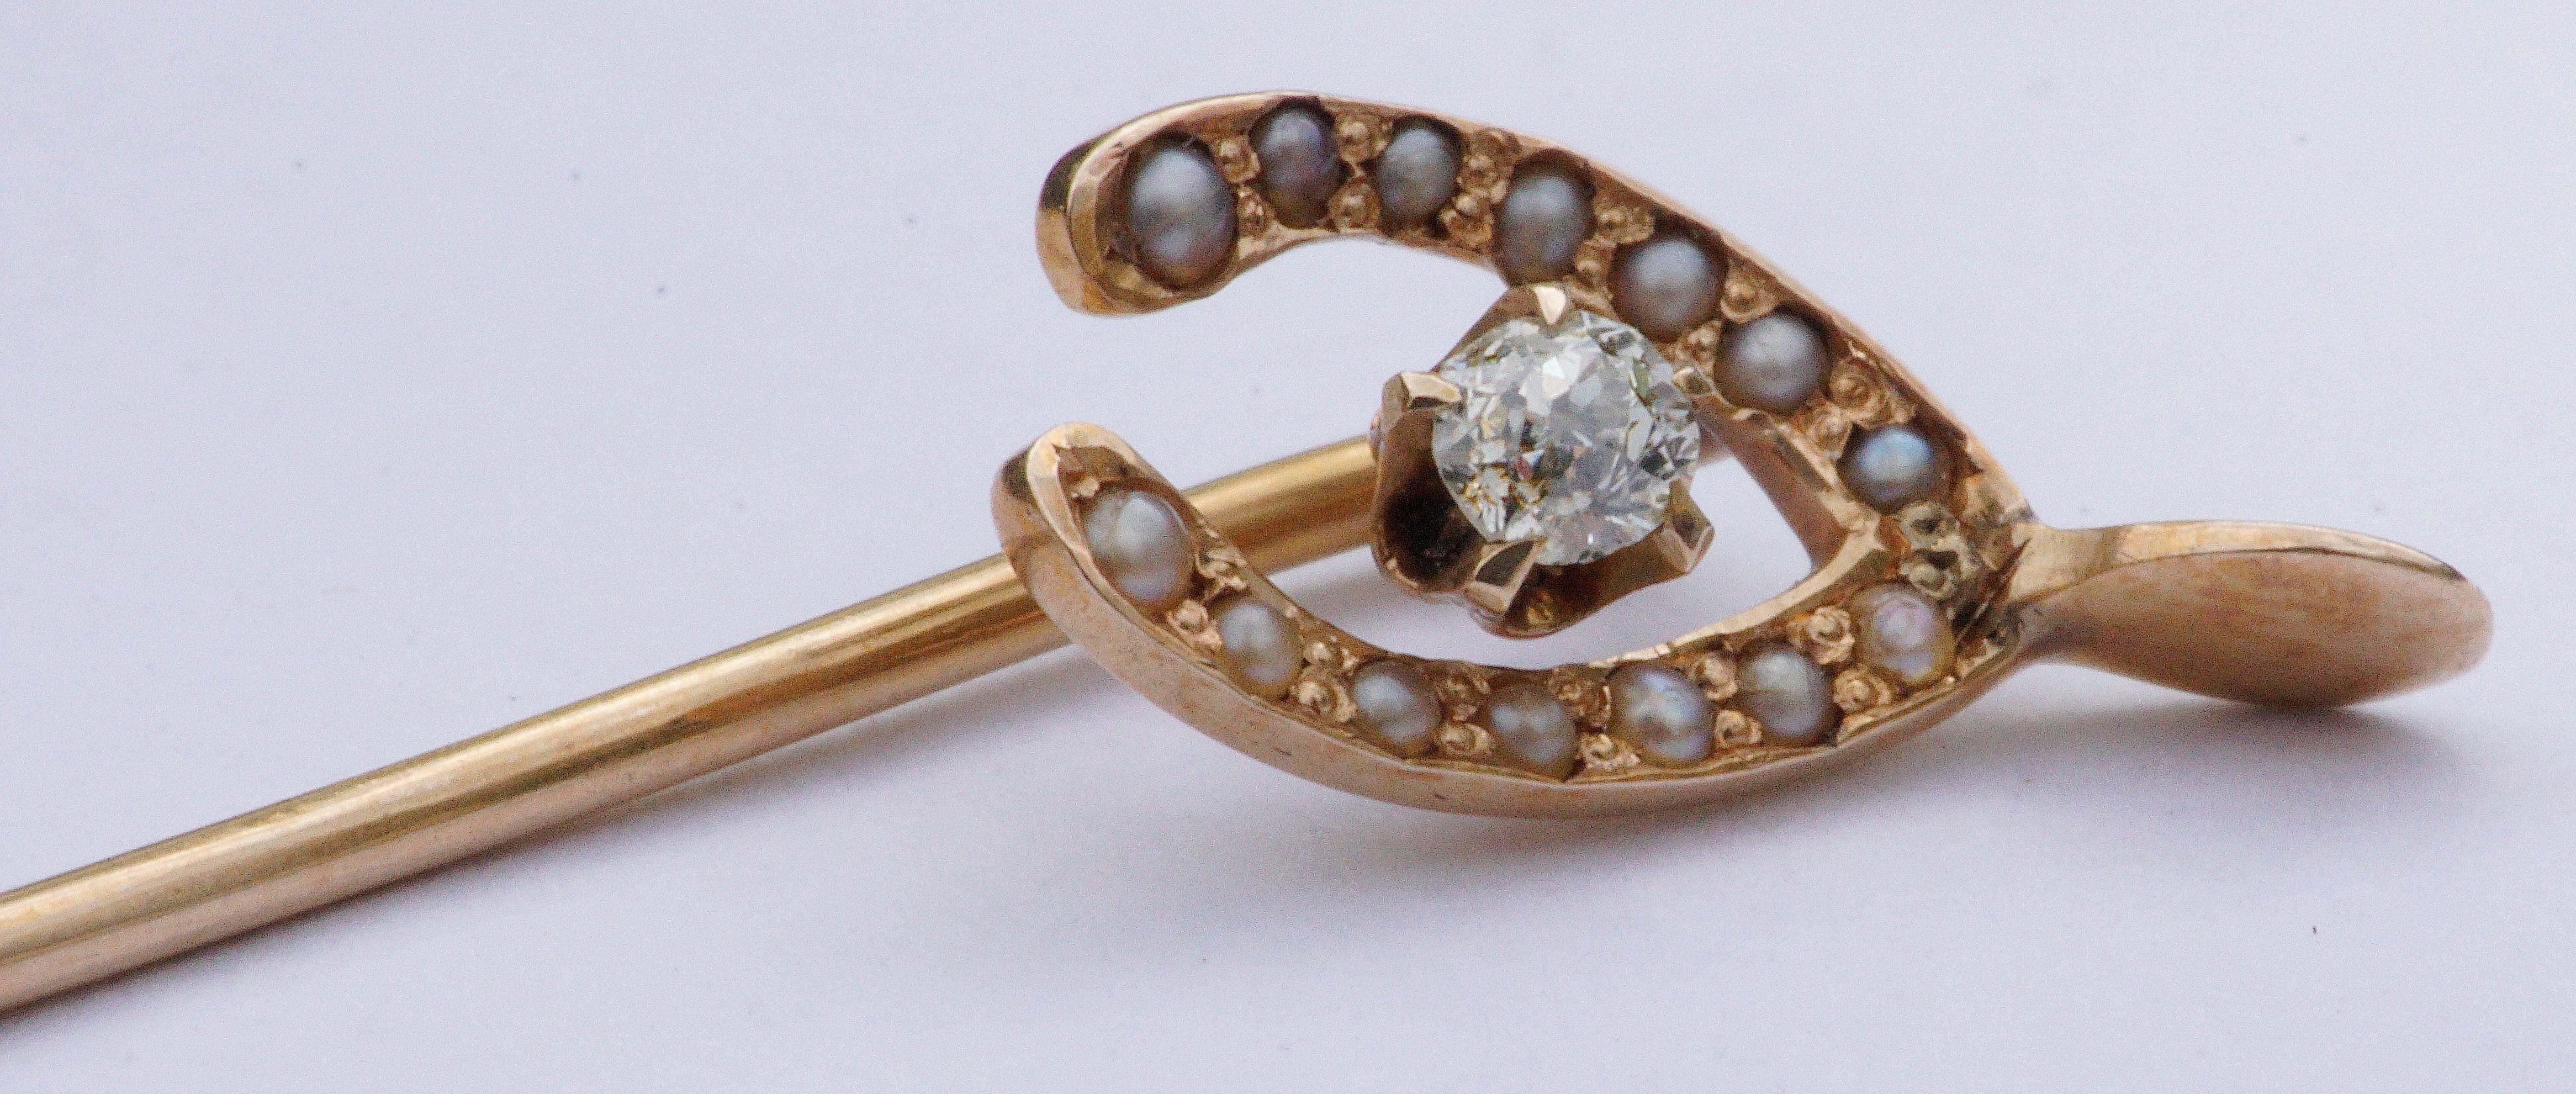 Antique Victorian to Edwardian 14K gold stick pin in a wishbone design, set with a .04 carat diamond and fourteen seed pearls. Stamped 14K.

Length 5.8cm, 2.28 inches, and weight 1.1g.  The wishbone is 7mm, .27 inch by 1.4cm, .55 inch. This is a